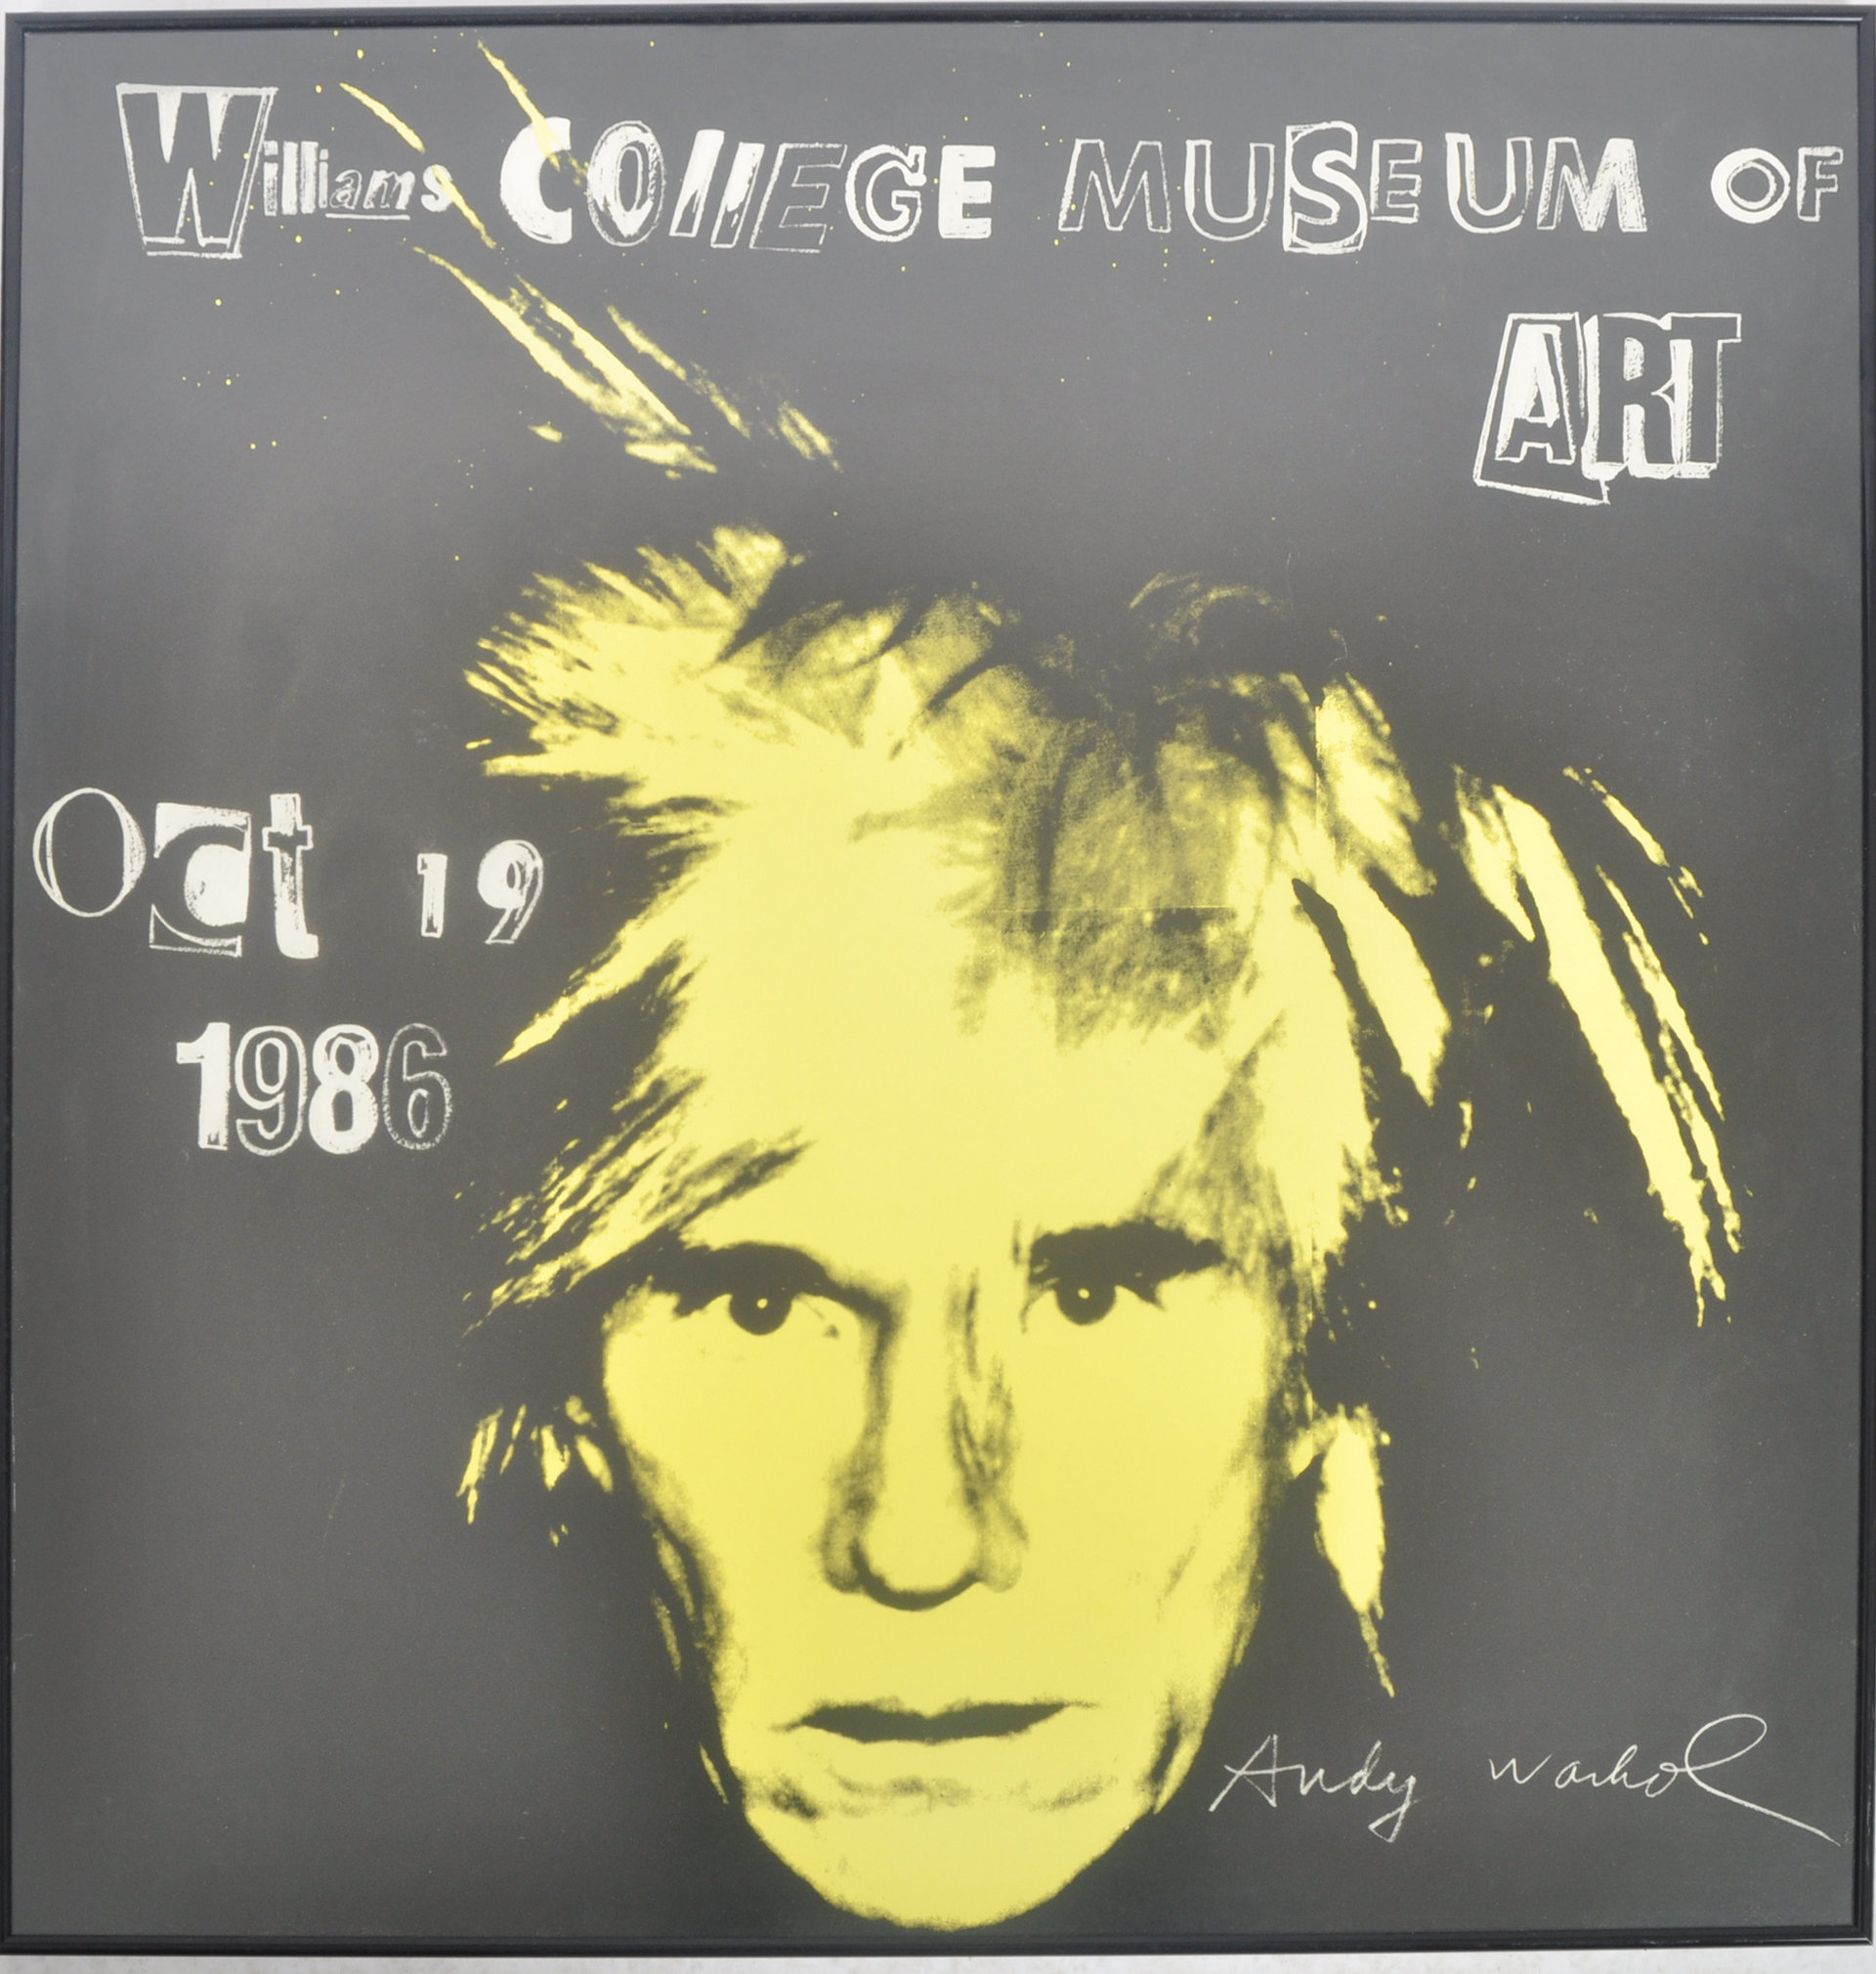 AFTER ANDY WARHOL (B.1928) - WILLIAMS COLLEGE MUSEUM OF ART